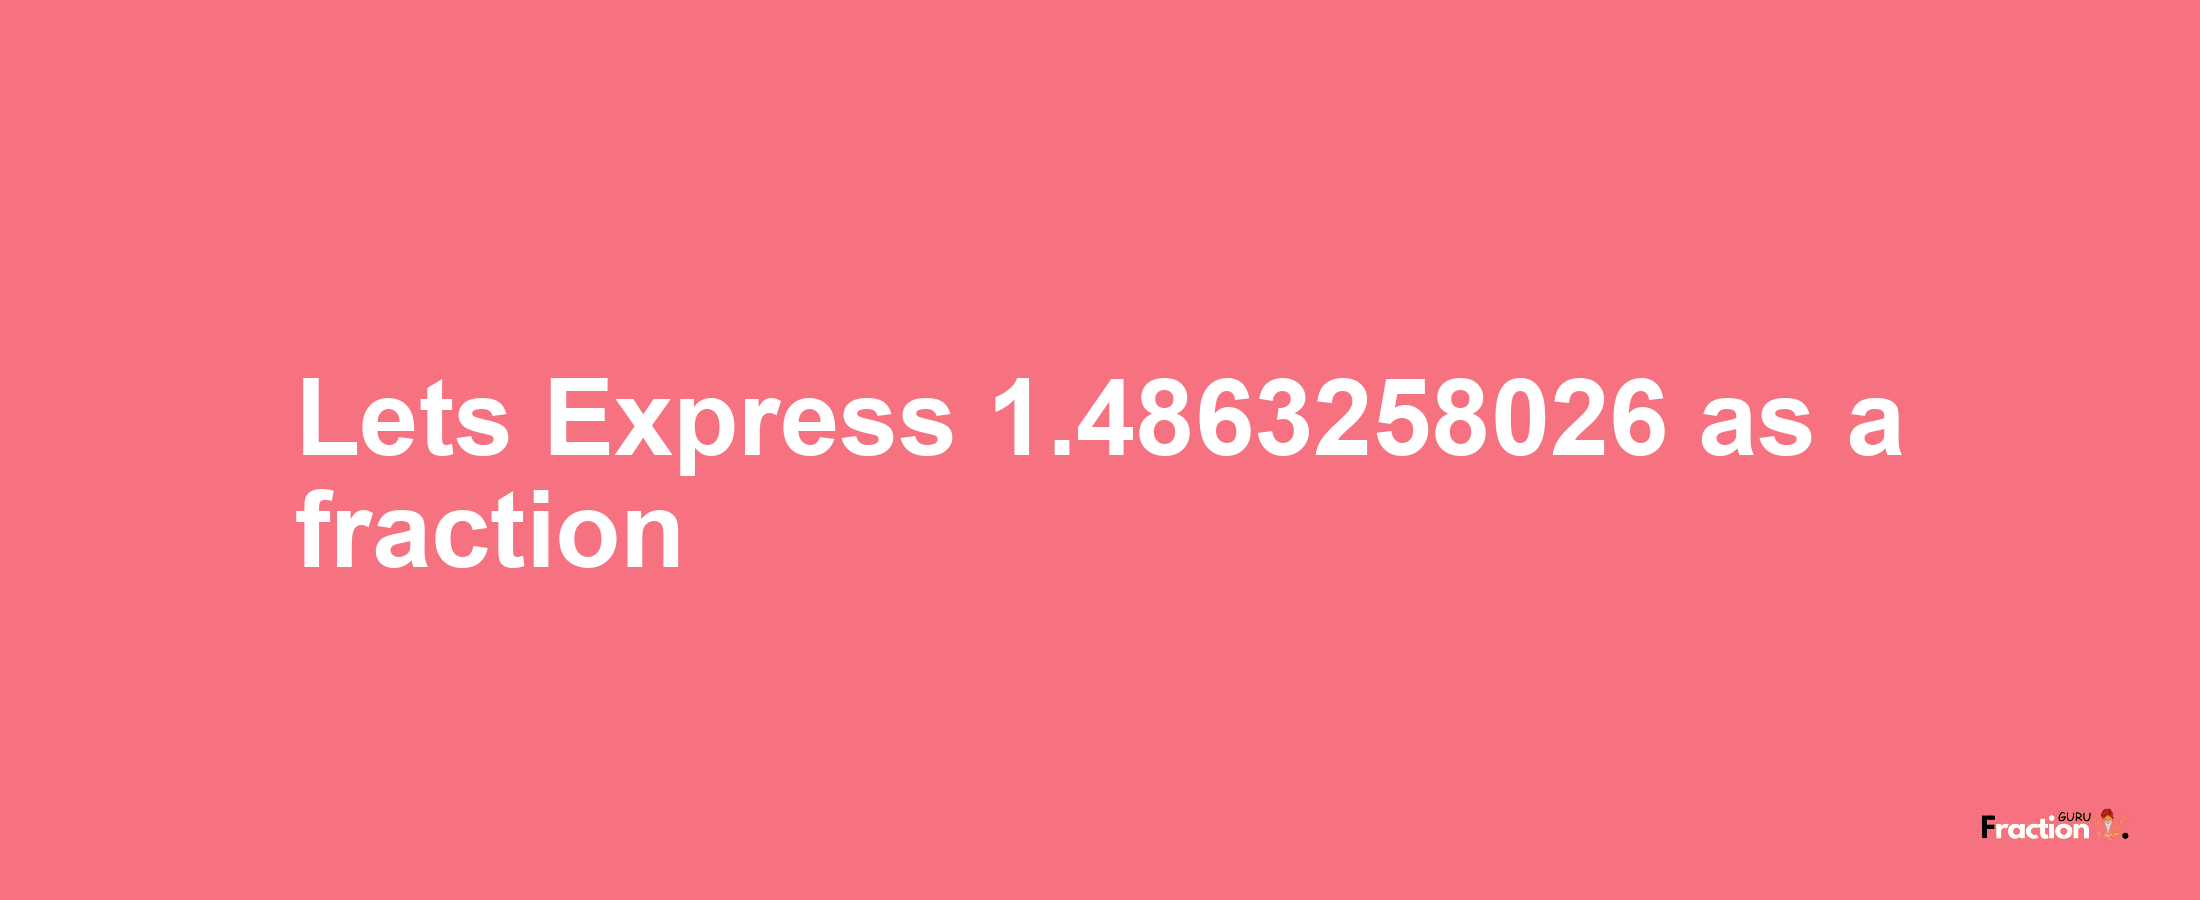 Lets Express 1.4863258026 as afraction